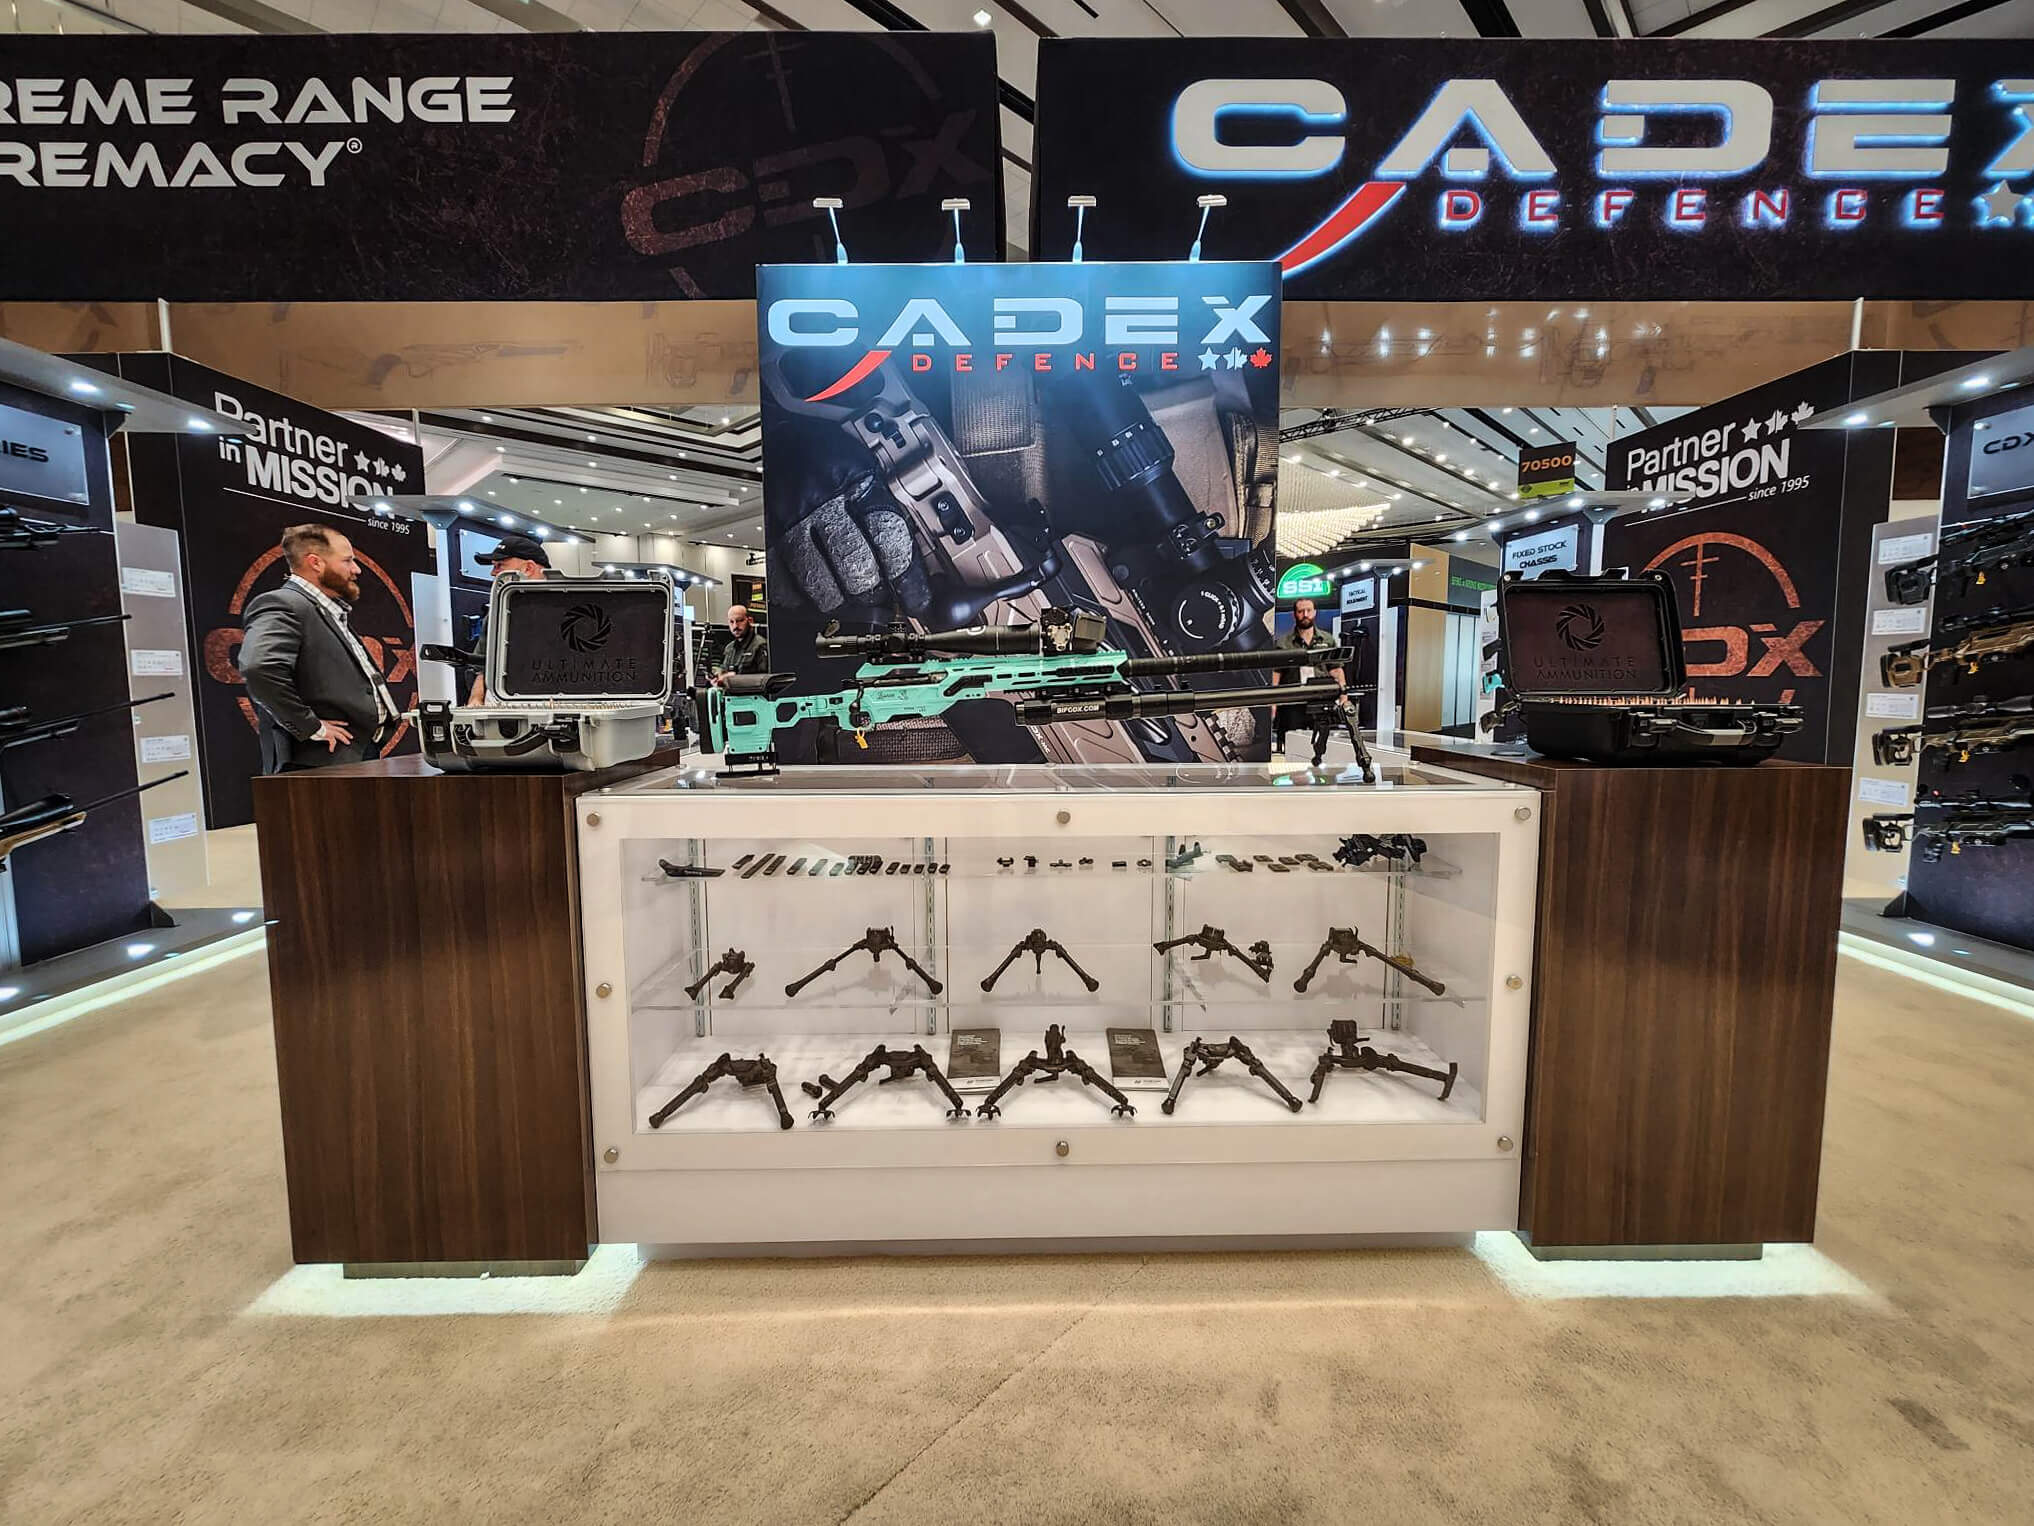 Cadex Defence – Our latest news